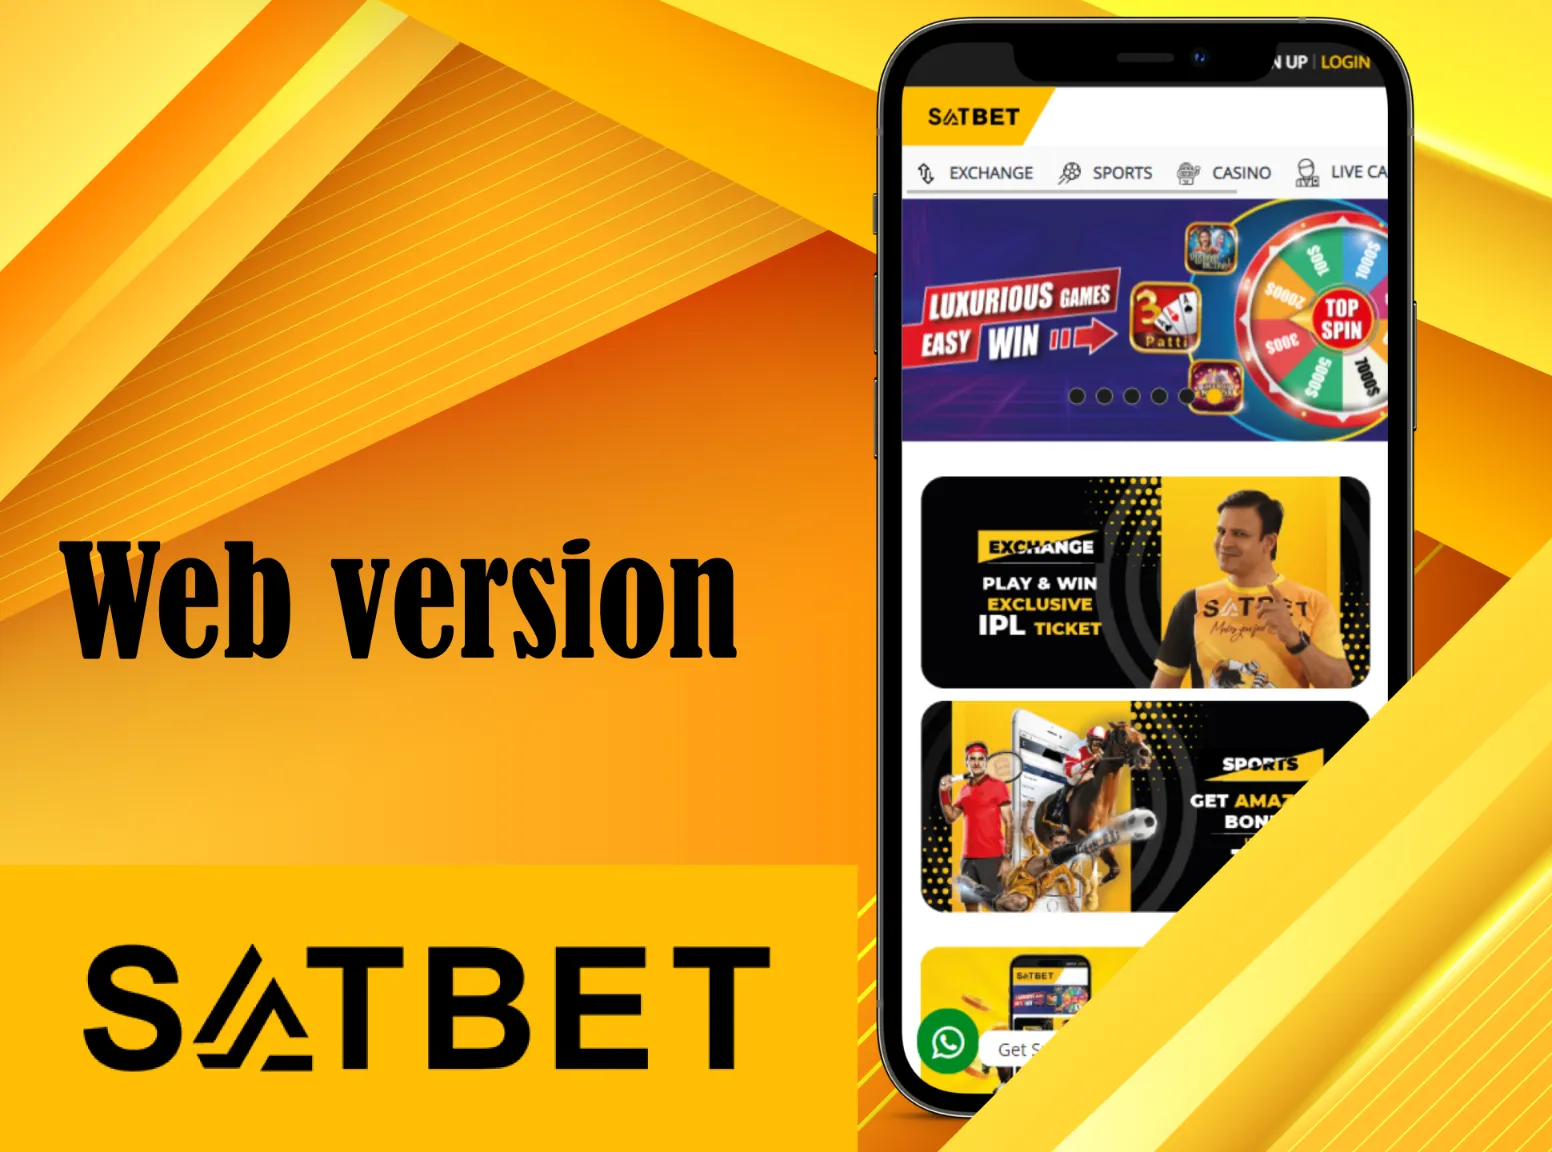 Use Satbet mobile website on any mobile device.